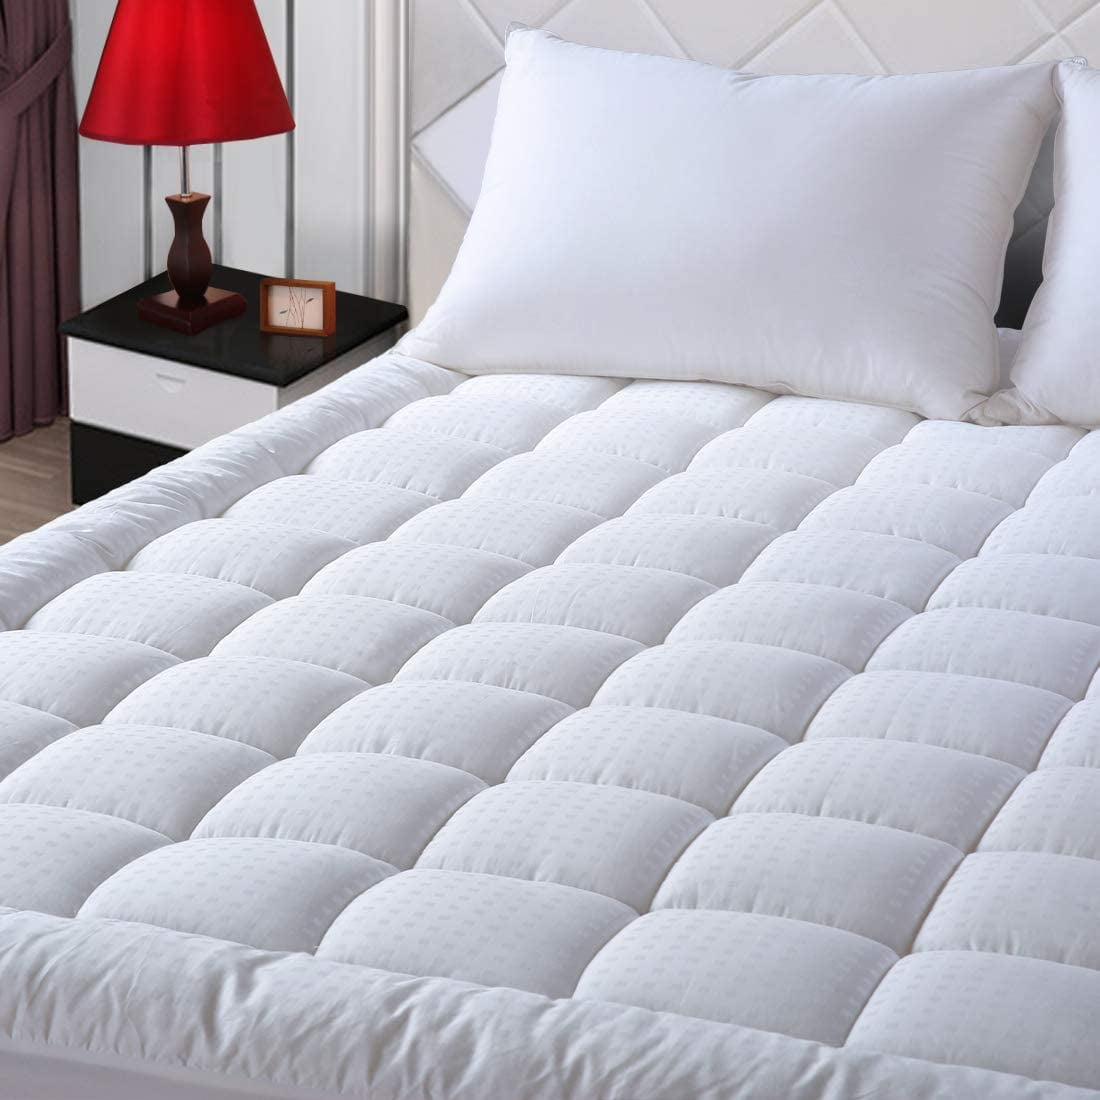 Cheer Collection Quilted Mattress Pad Extra-Deep 18 Mattress Cover Twin Size 39 x 75 Twin Size 39 x 75 COMIN18JU070057 